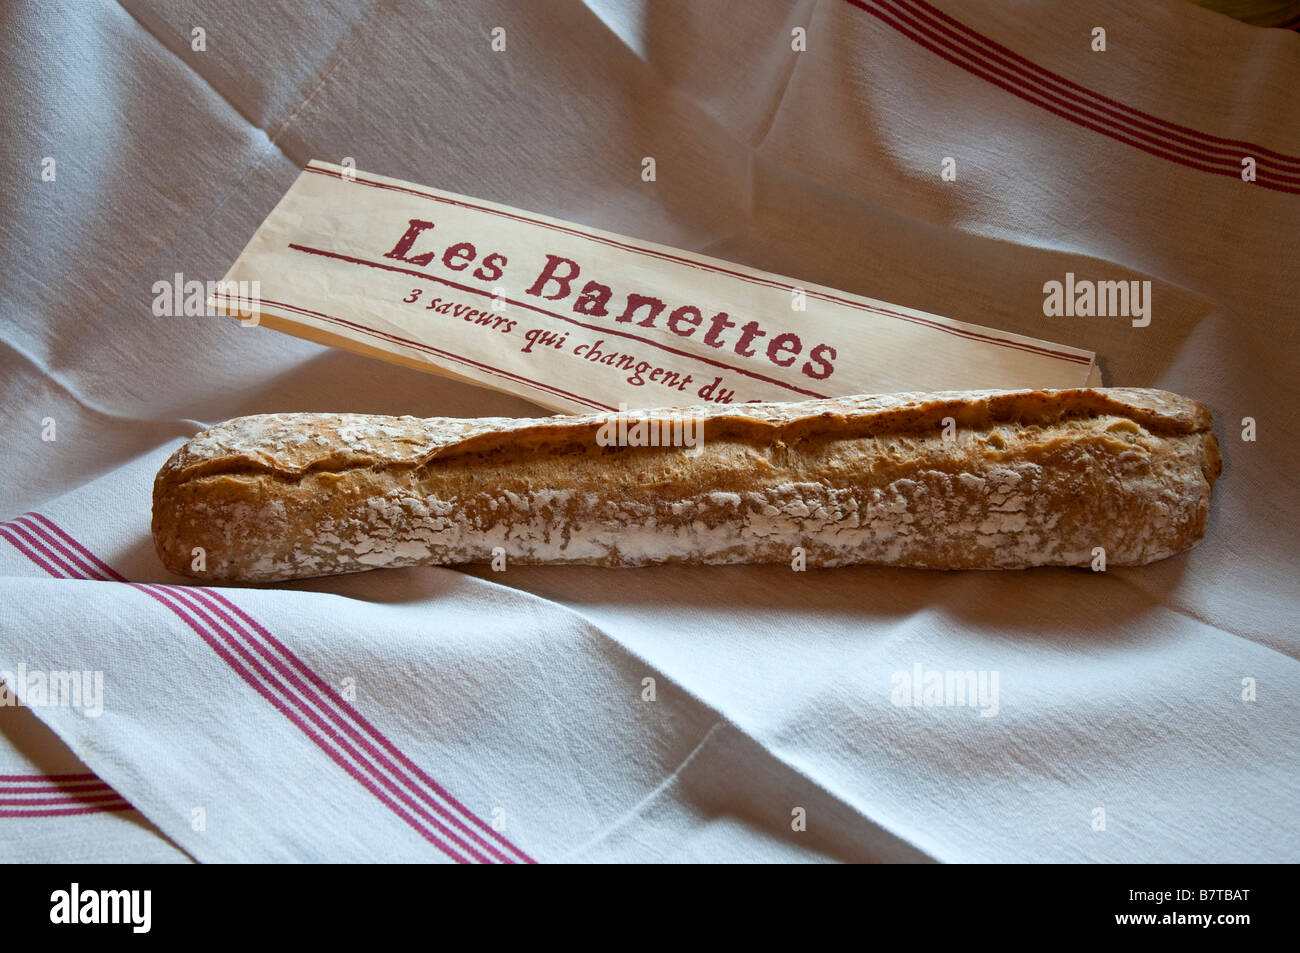 French Banette / baguette with paper bag - France Stock Photo - Alamy